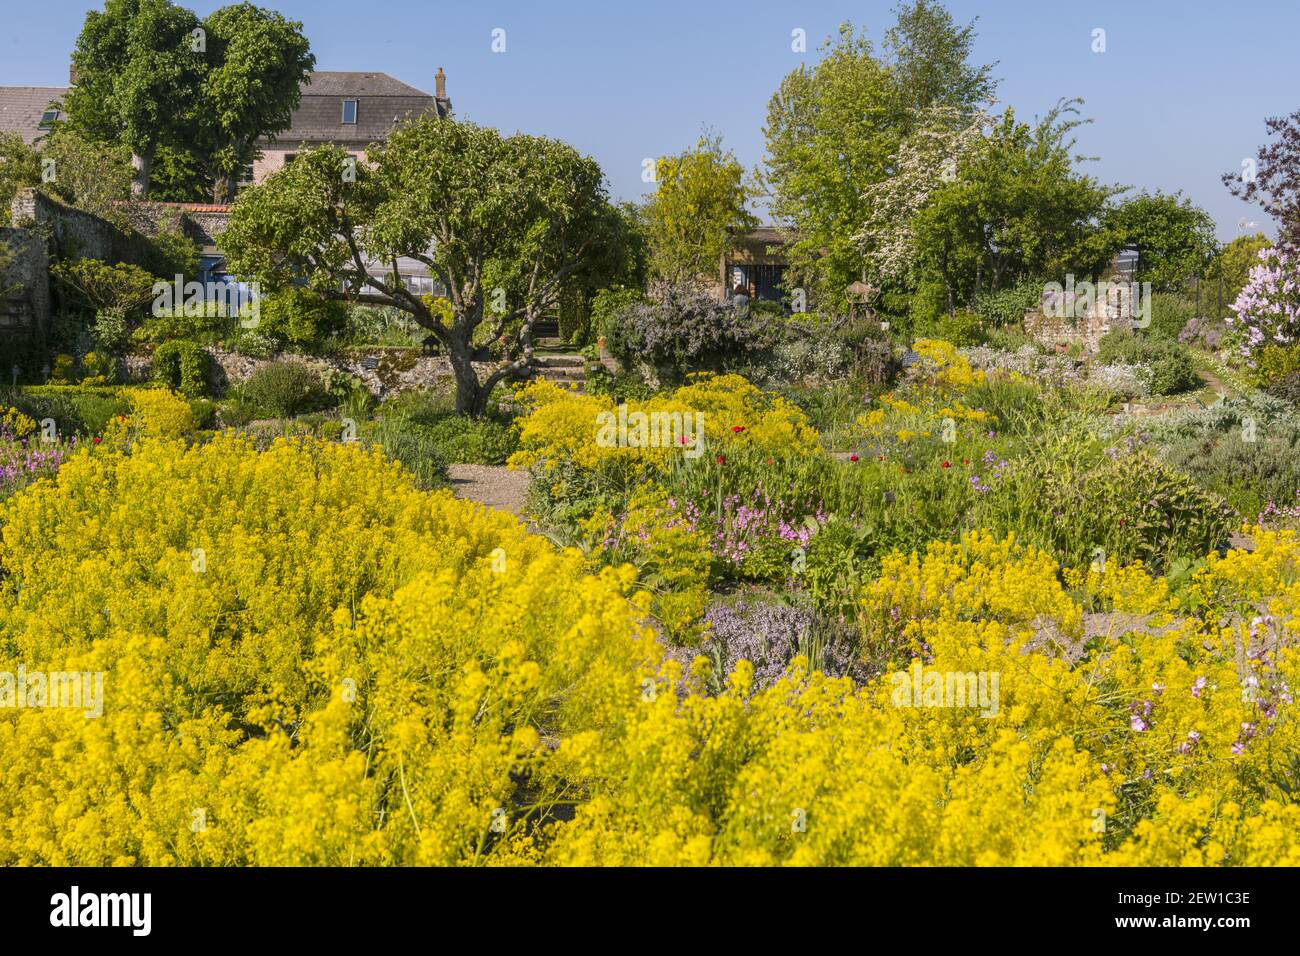 France, Somme, Baie de Somme, Saint-Valery-sur-Somme, in yellow, dyer's woad (Isatis tinctoria L.), Waide in Picard, the Herbarium is a medieval garden classified Remarkable Garden restored and maintained by an association since 1995 Stock Photo